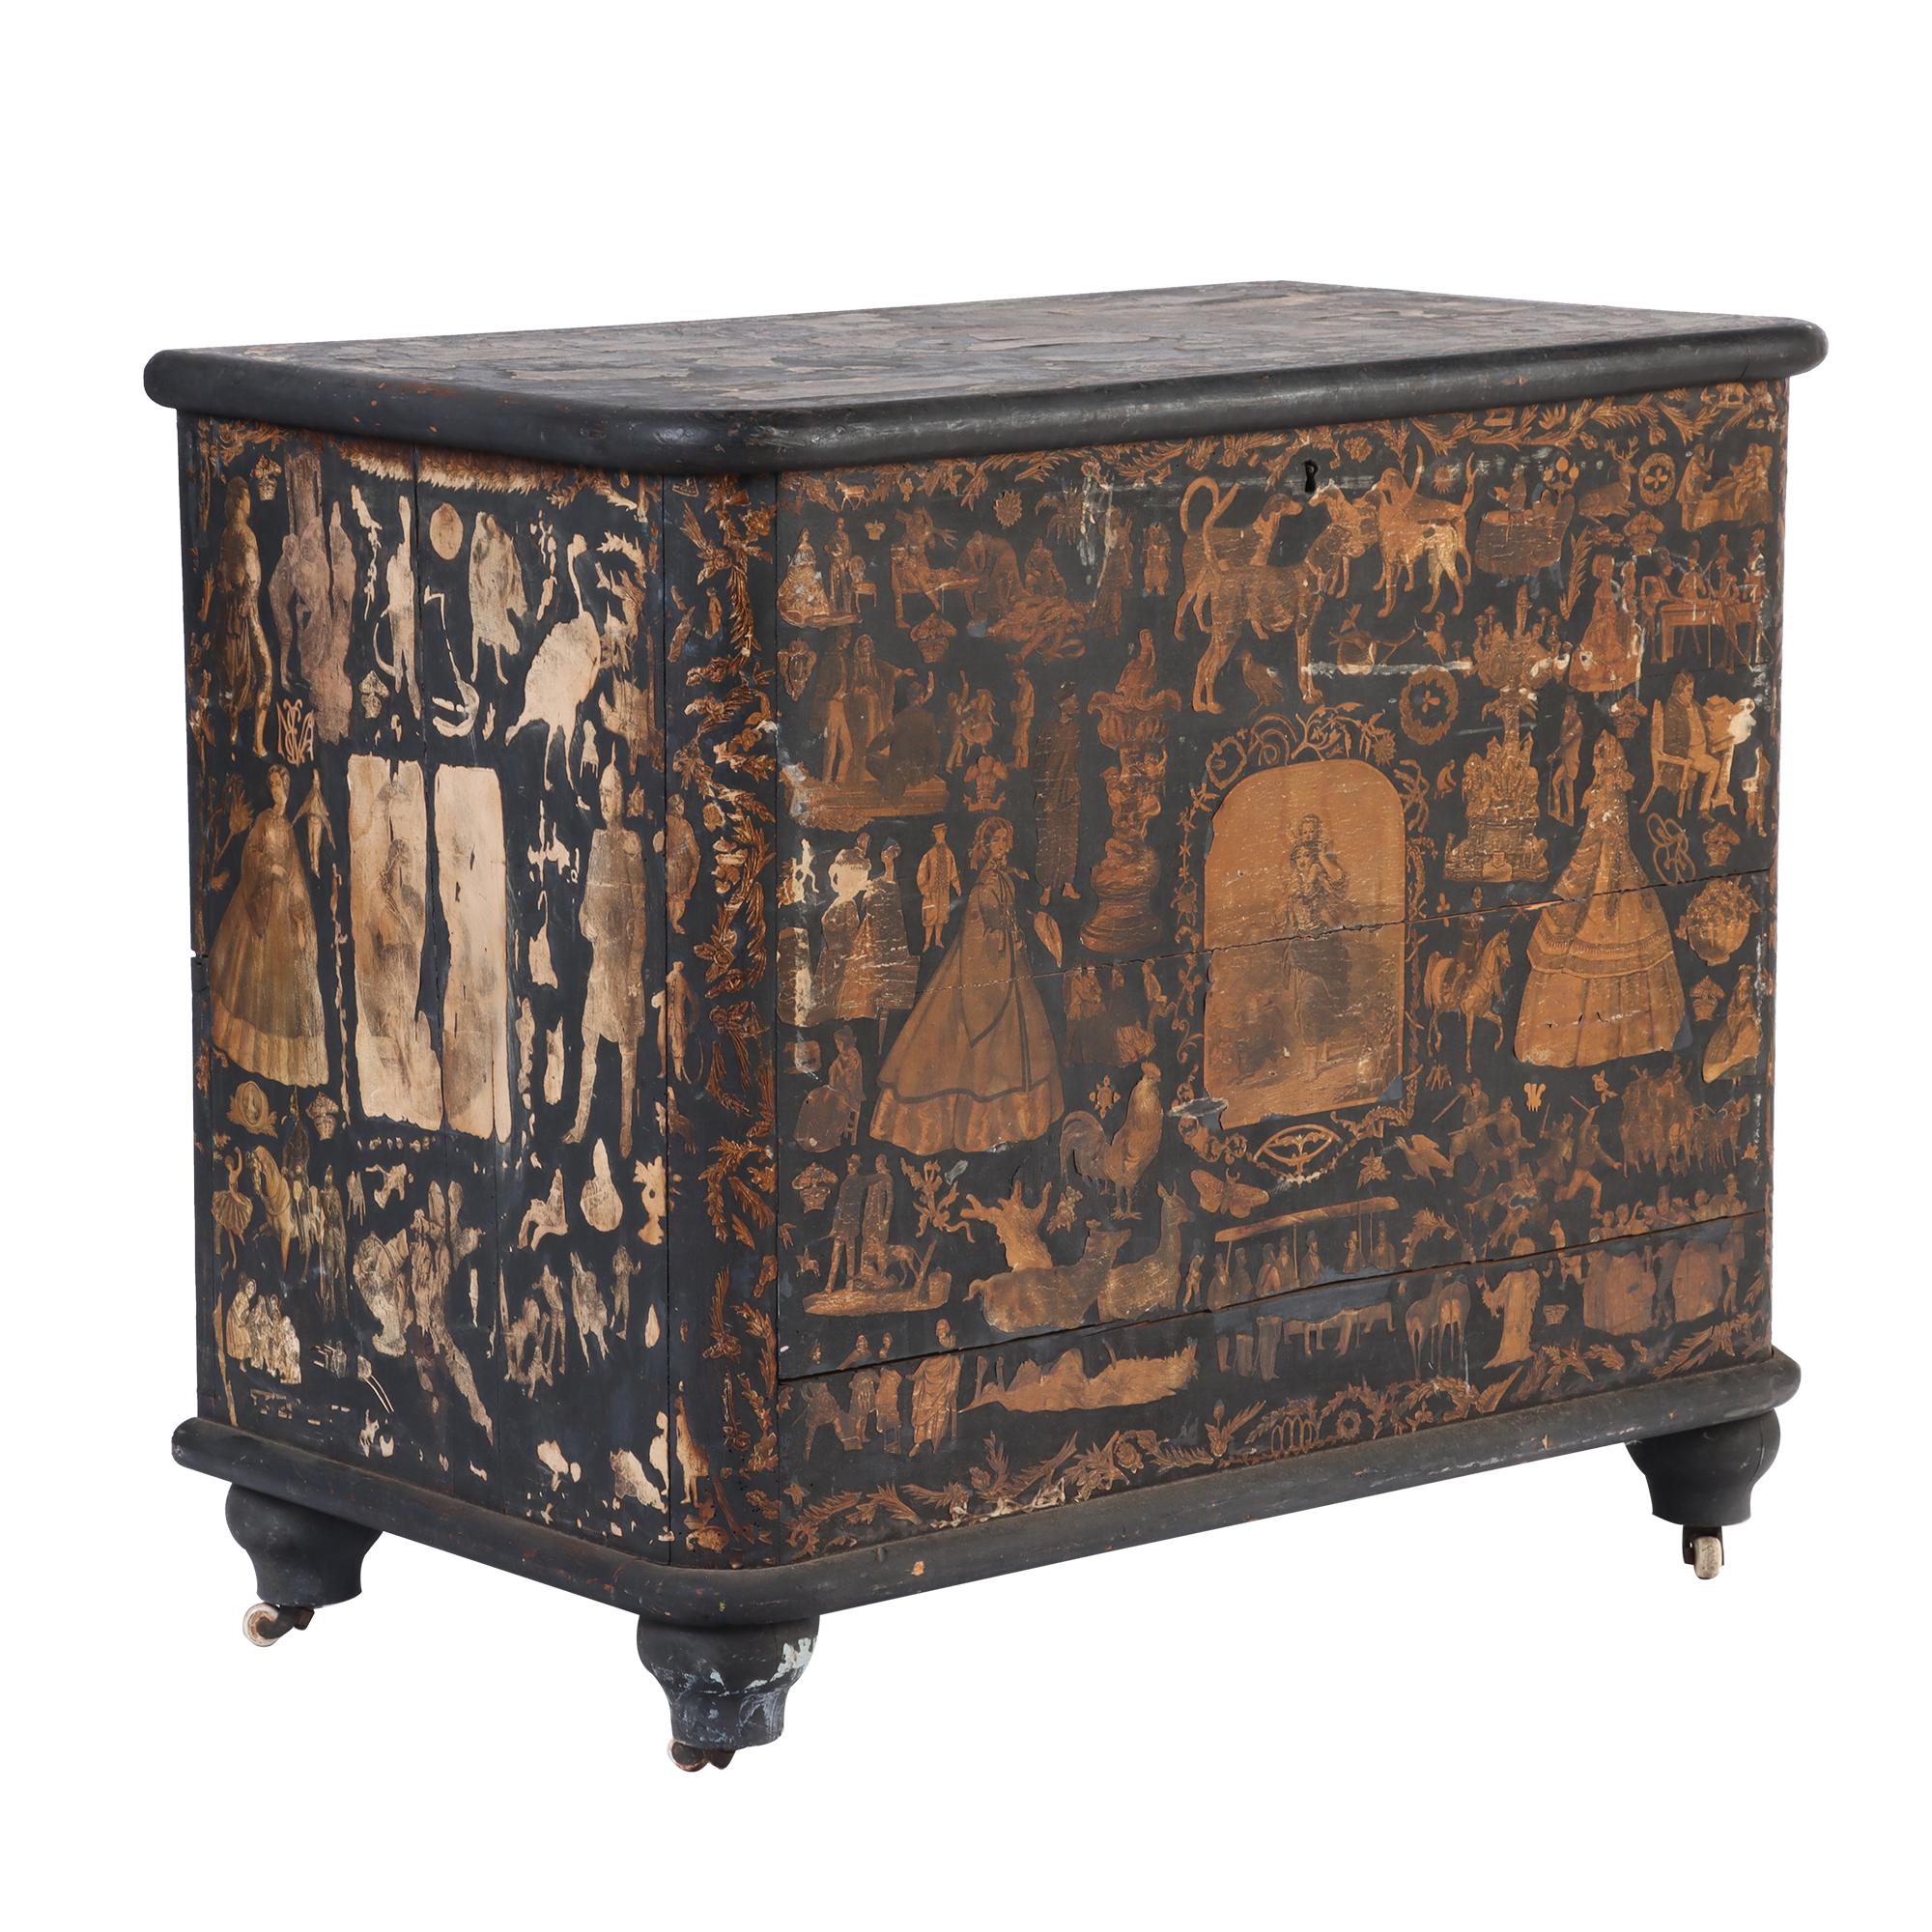 A beautiful Decoupage vintage chest/sideboard. Black with paper decoupage worn to a beautiful patina. American 19th Century.
 